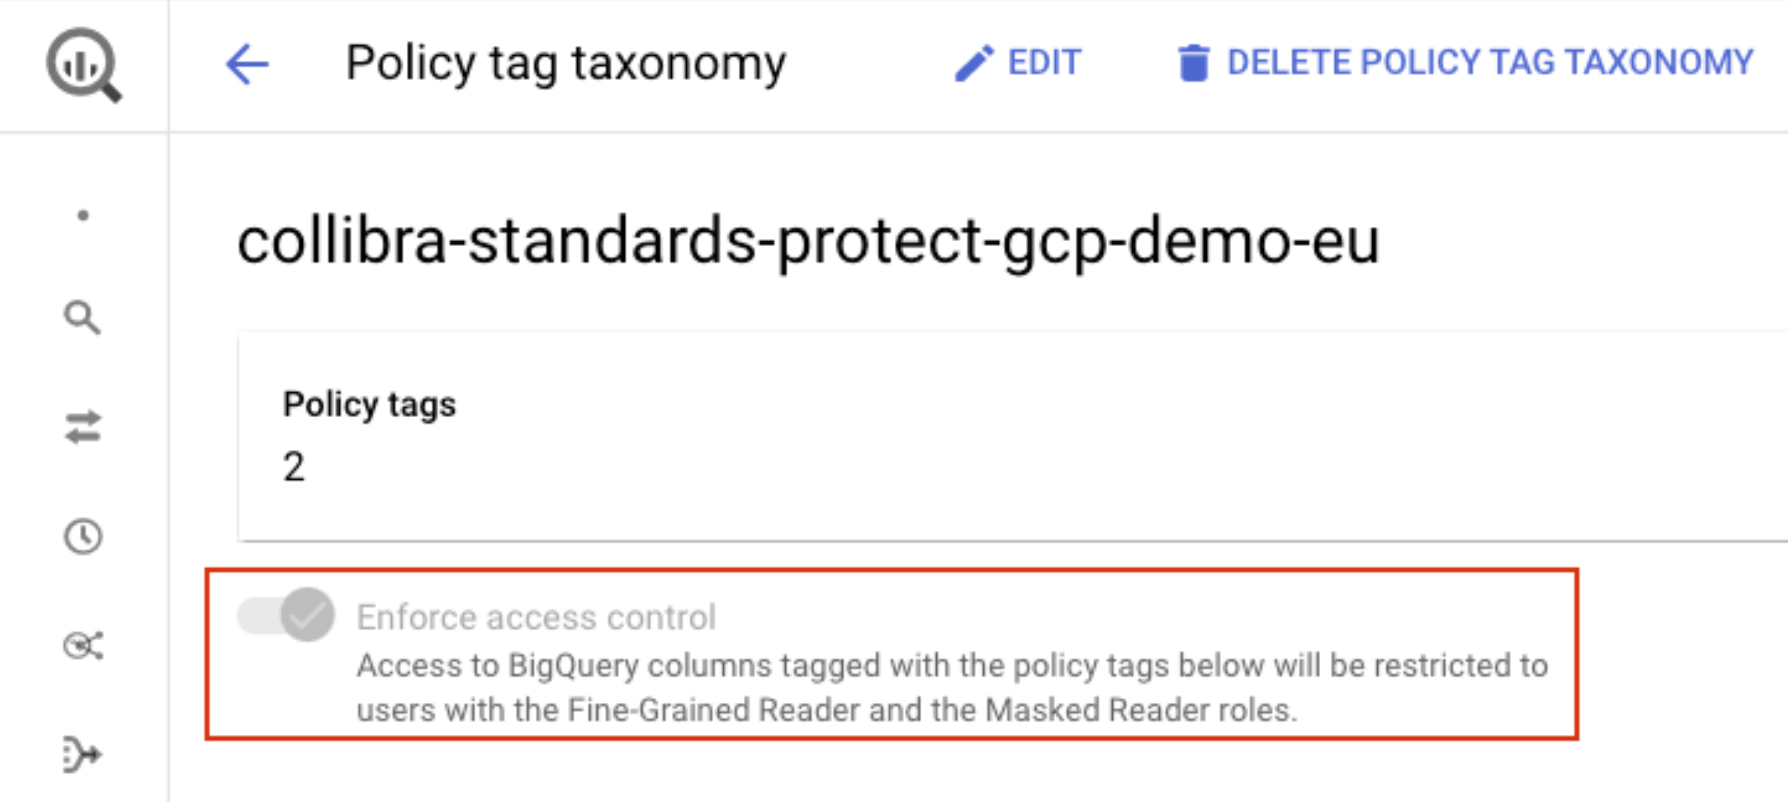 Policy tag taxonomy